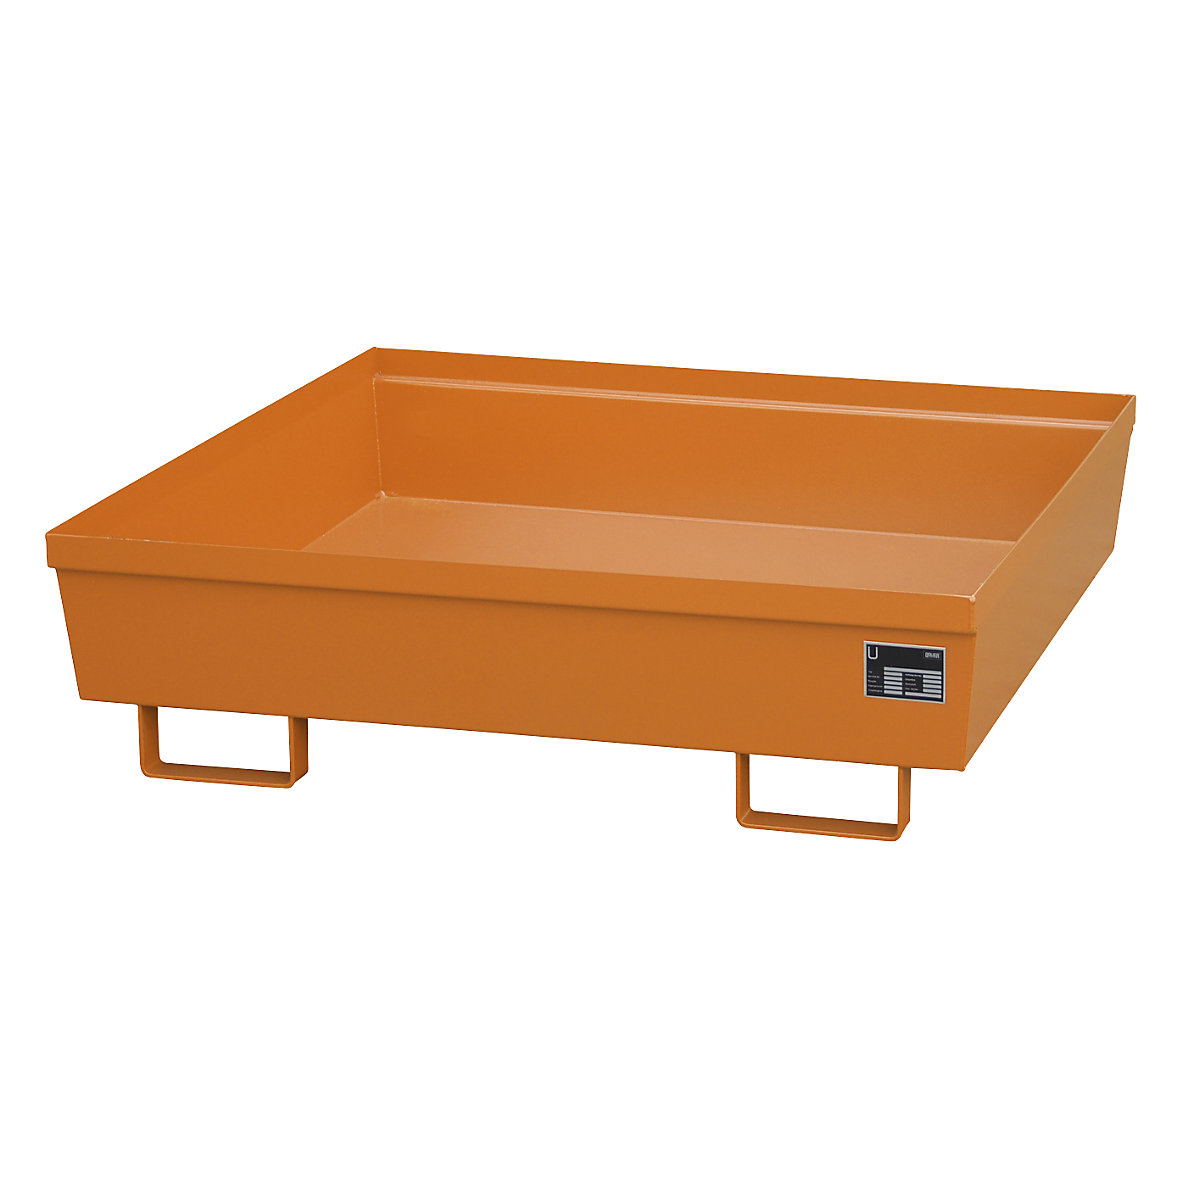 Steel sump tray with edge profiles – eurokraft pro, LxWxH 1200 x 1200 x 335 mm, without grate, orange RAL 2000-7